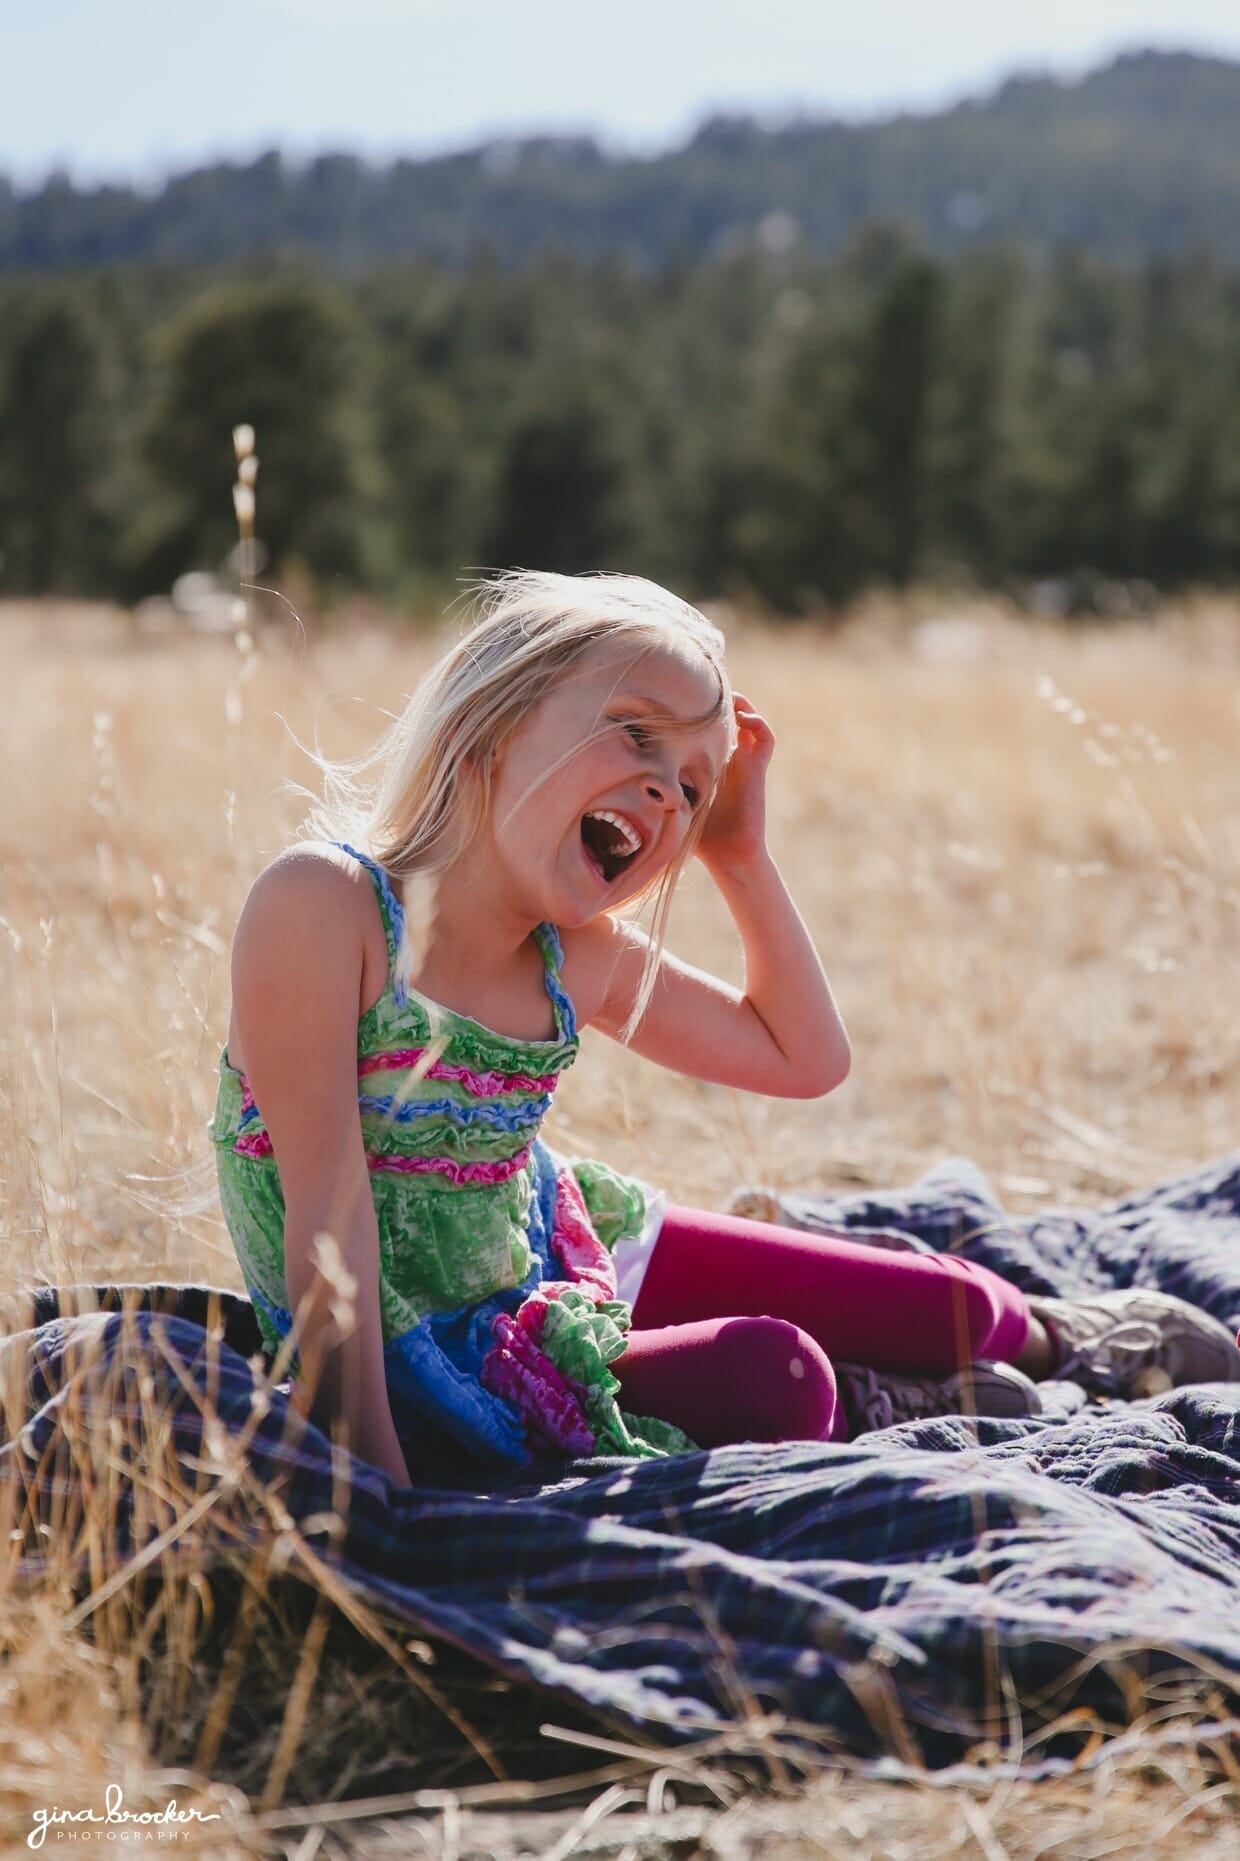 A portrait of a young girl laughing on a blanket during an outdoor family photo session